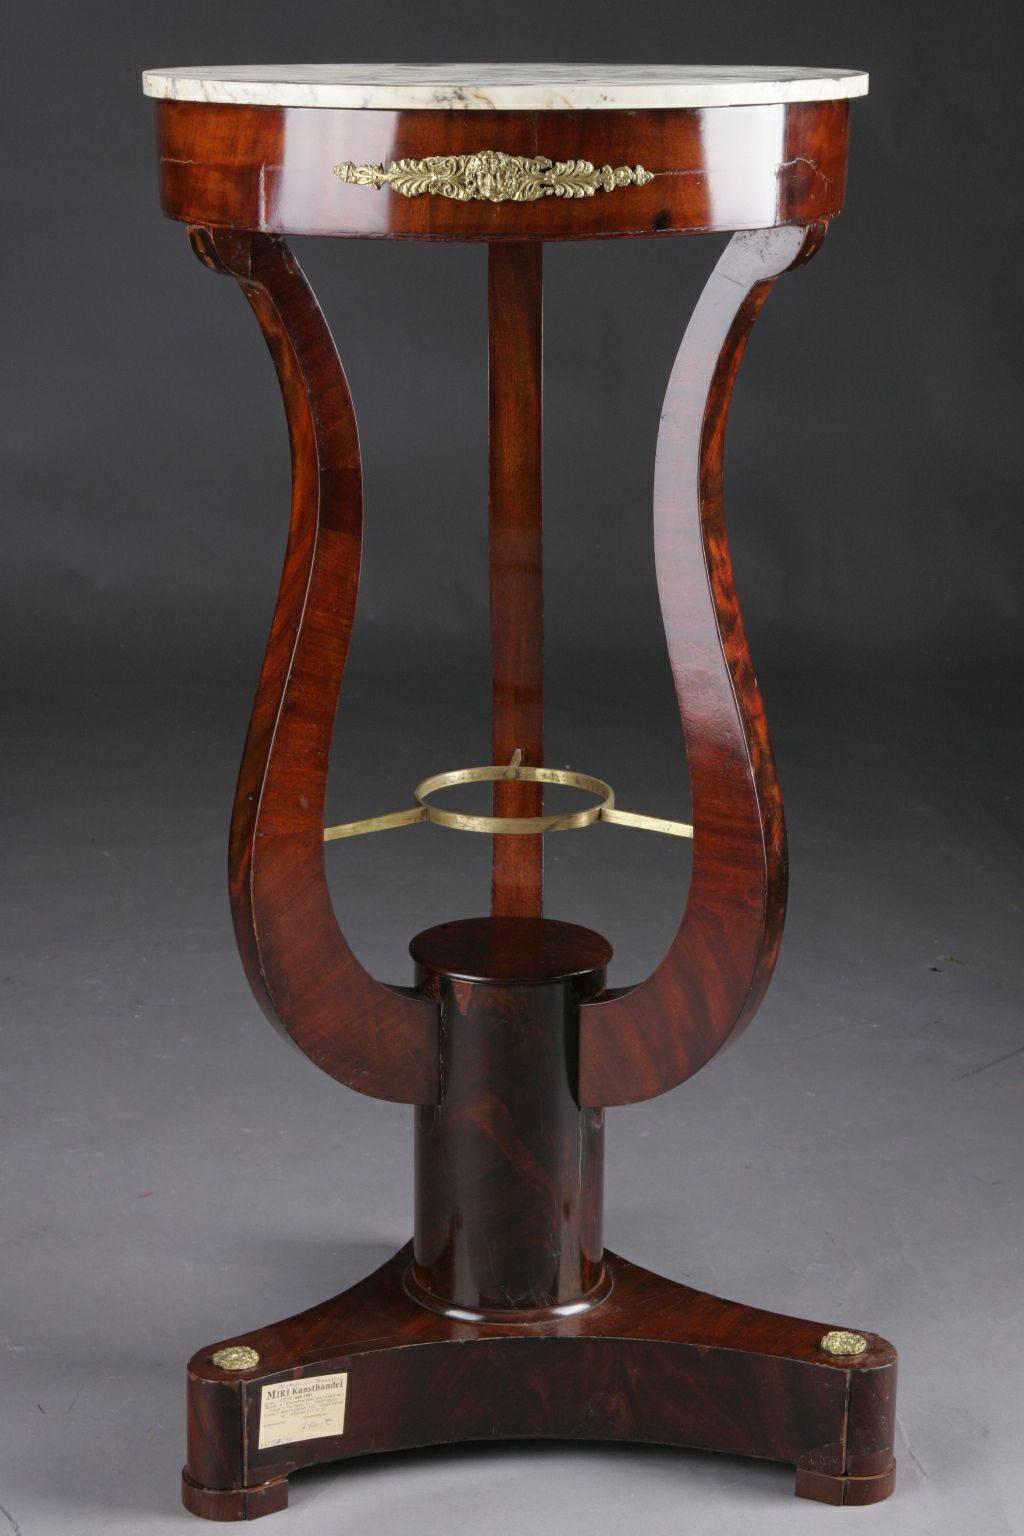 Mahogany on solid wood and partly boned. Round leaf with black-and-white interspersed marble, over simple frame and lyra-shaped curly legs on three-sided retracted base plate and disc feet. This form is extremely rare. Decorative bronze